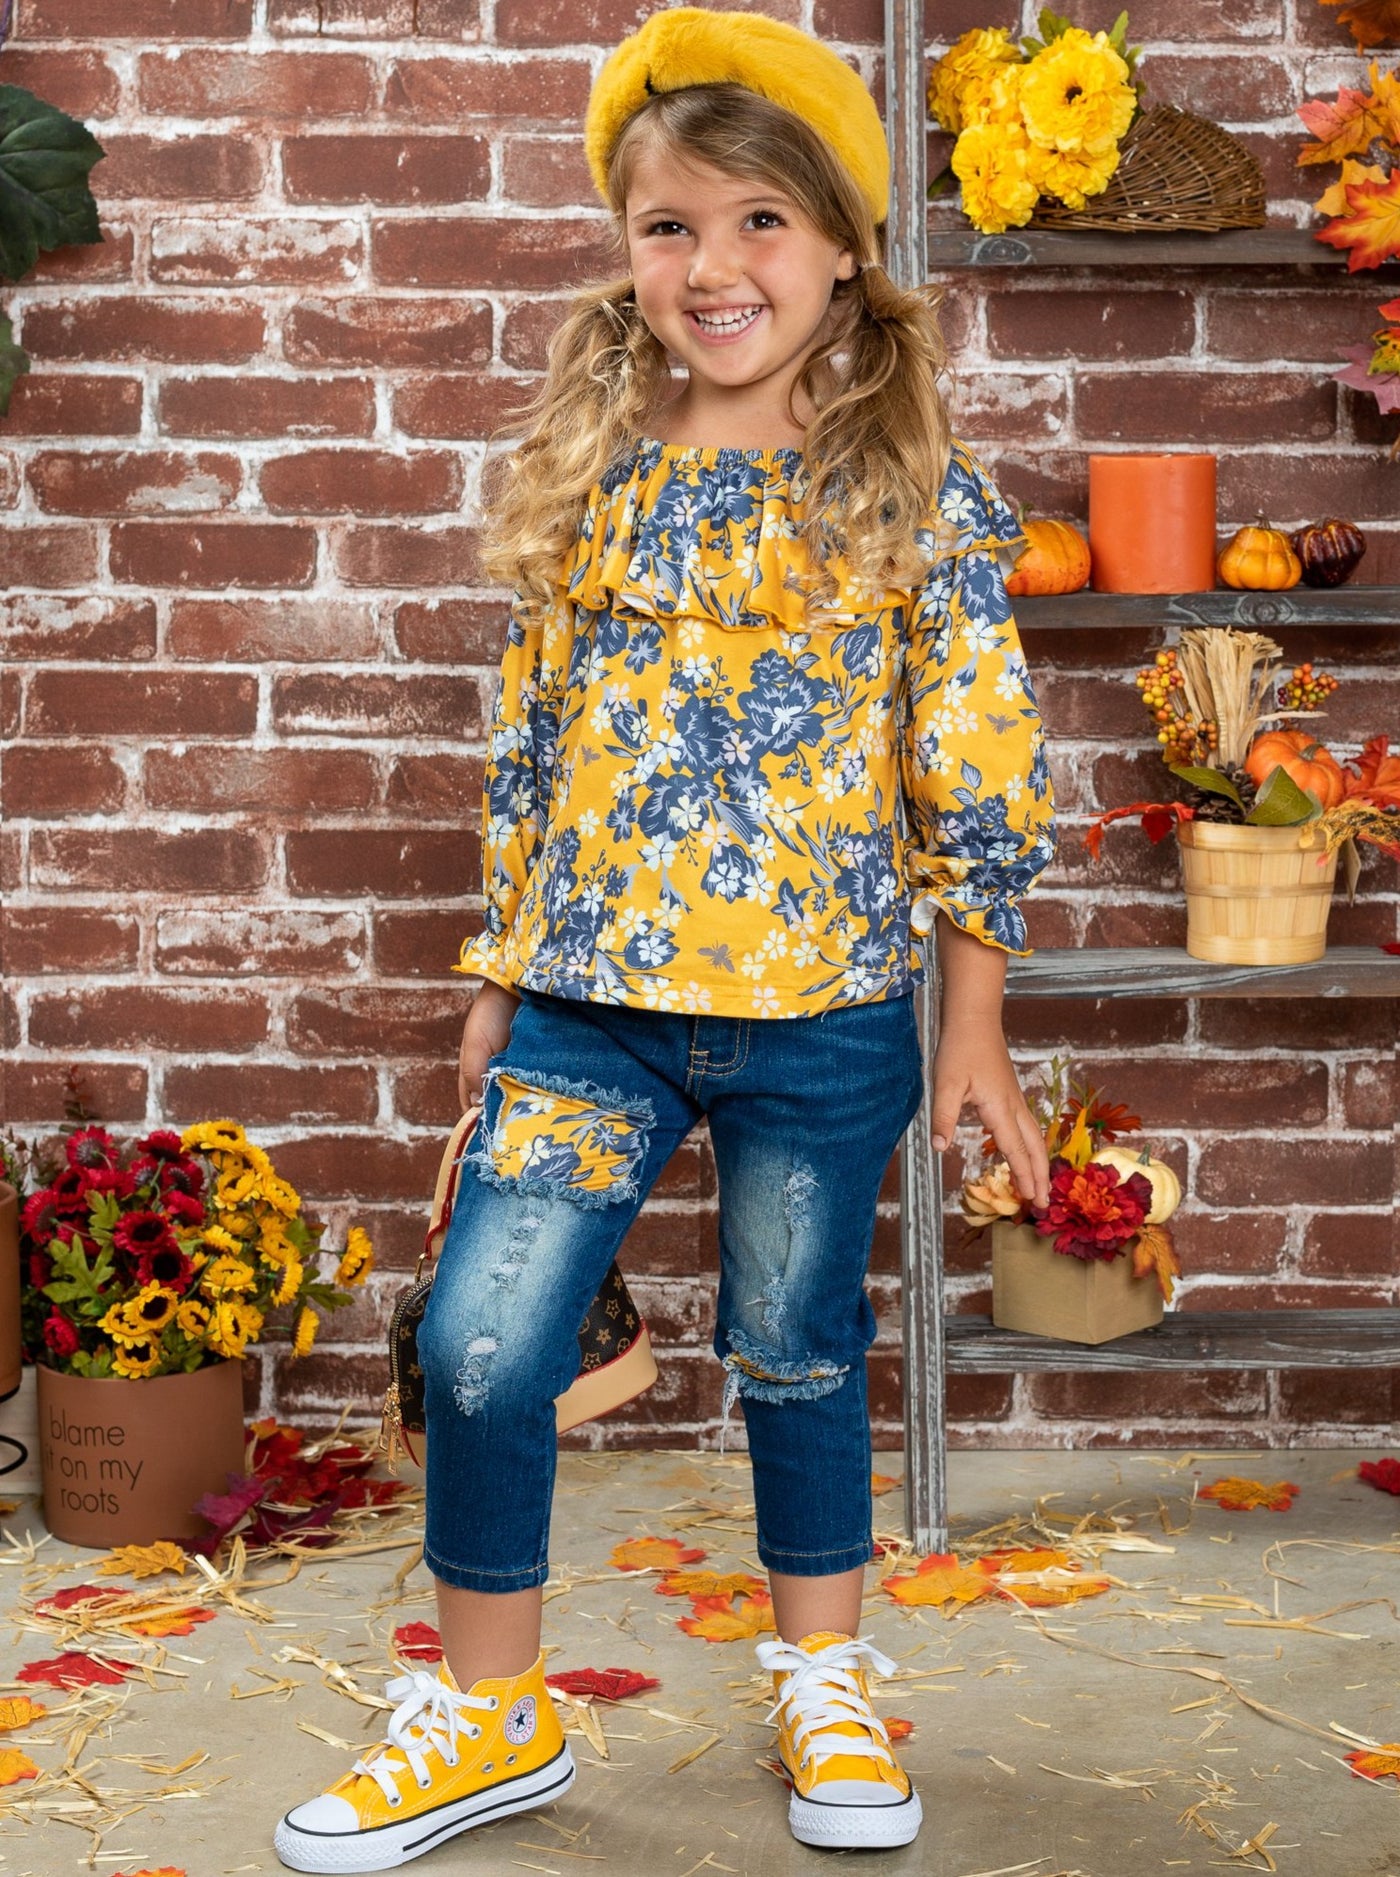 Girls set features a double ruffle neckline bib, floral top, and patched jeans.